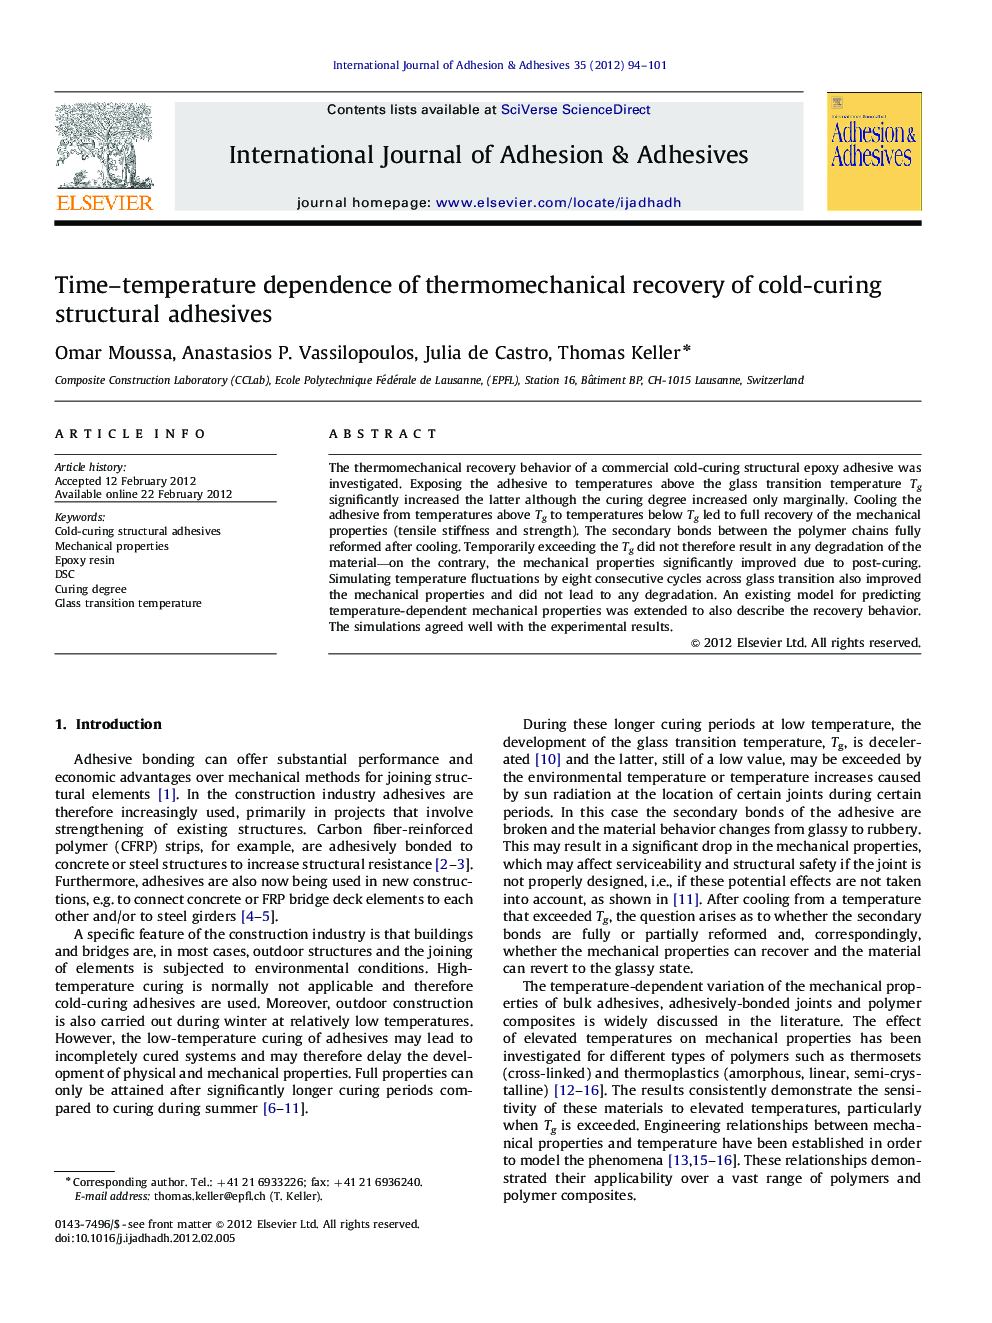 Time–temperature dependence of thermomechanical recovery of cold-curing structural adhesives